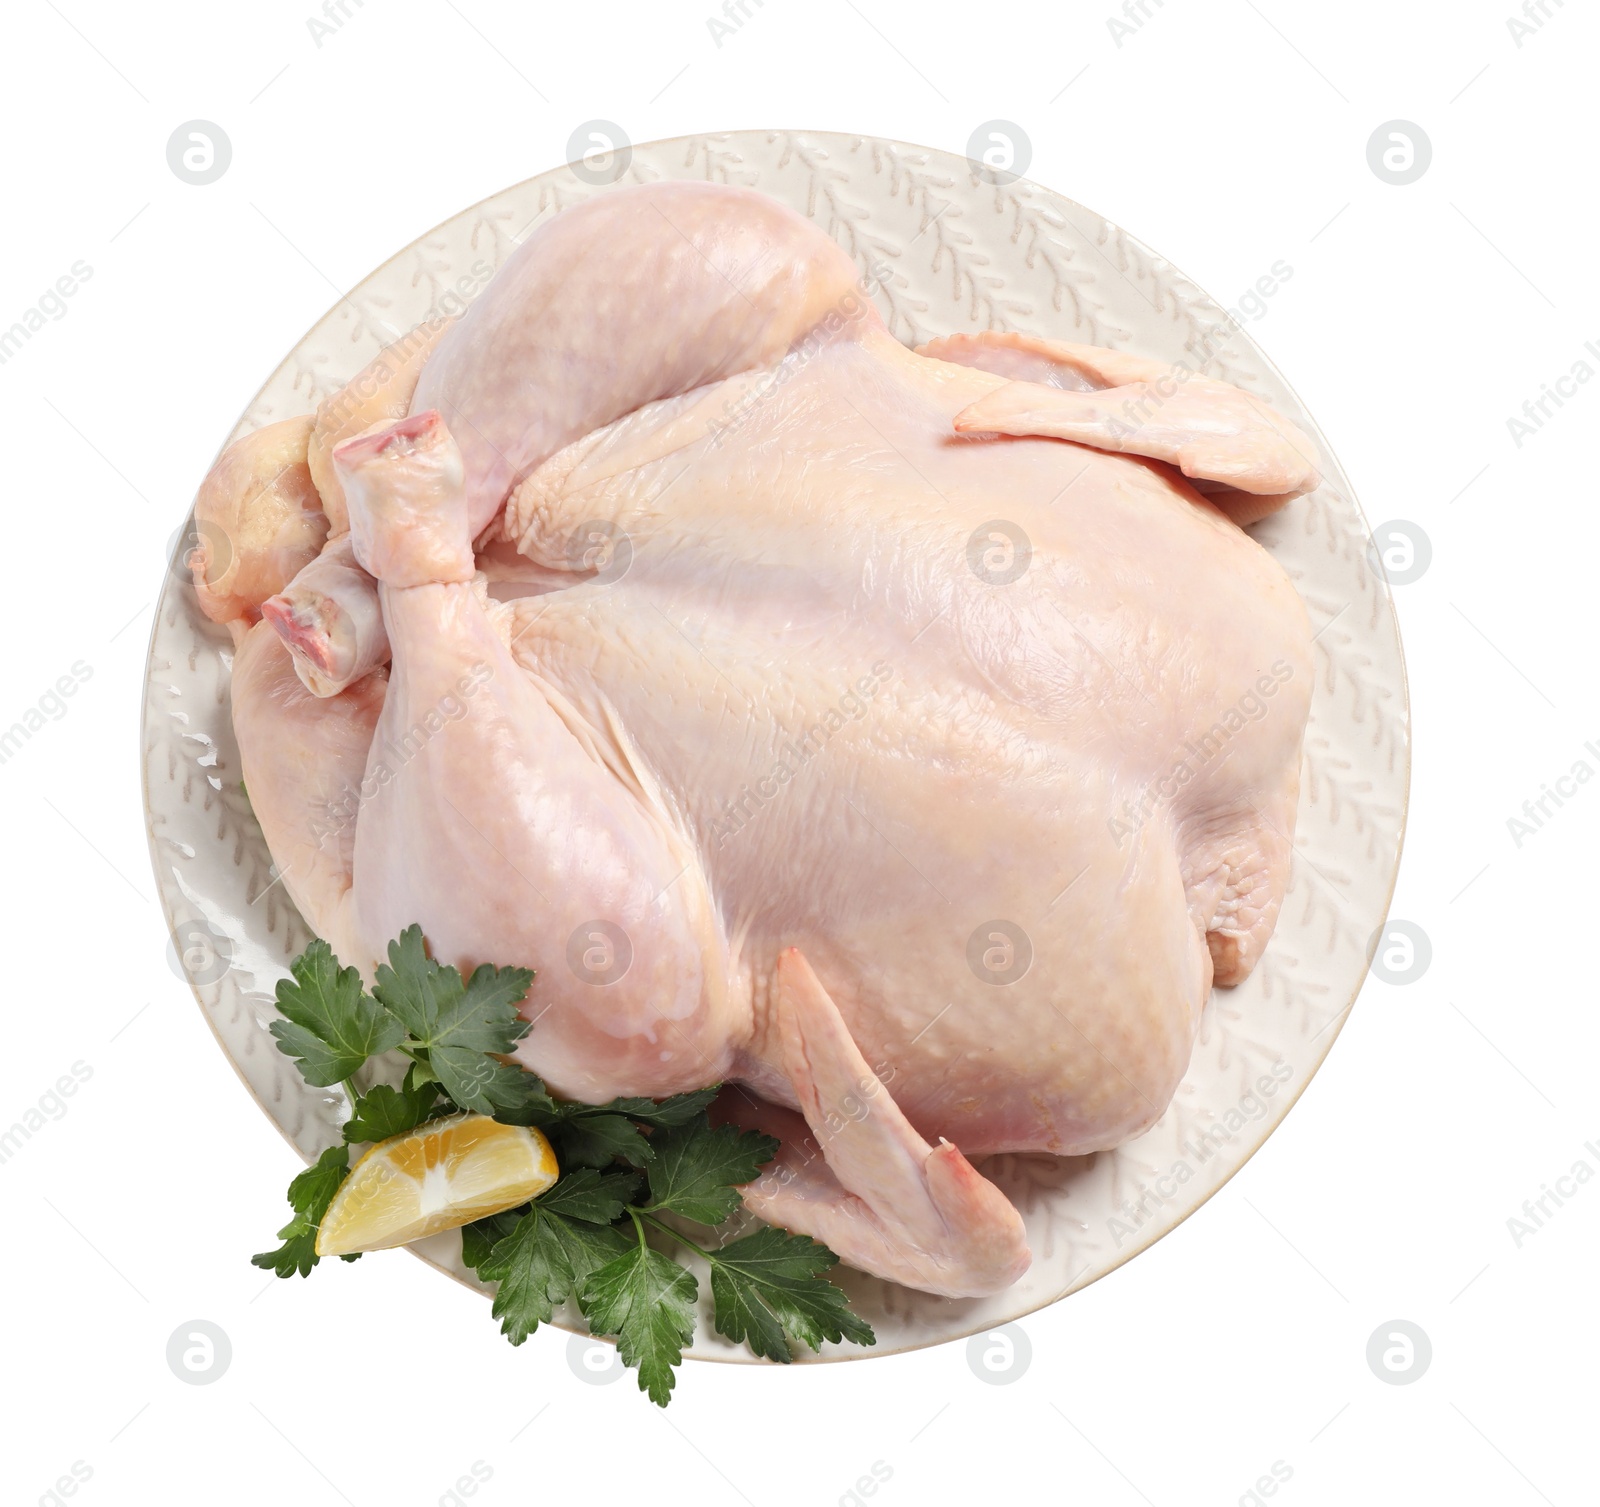 Photo of Fresh raw chicken with lemon and parsley isolated on white, top view